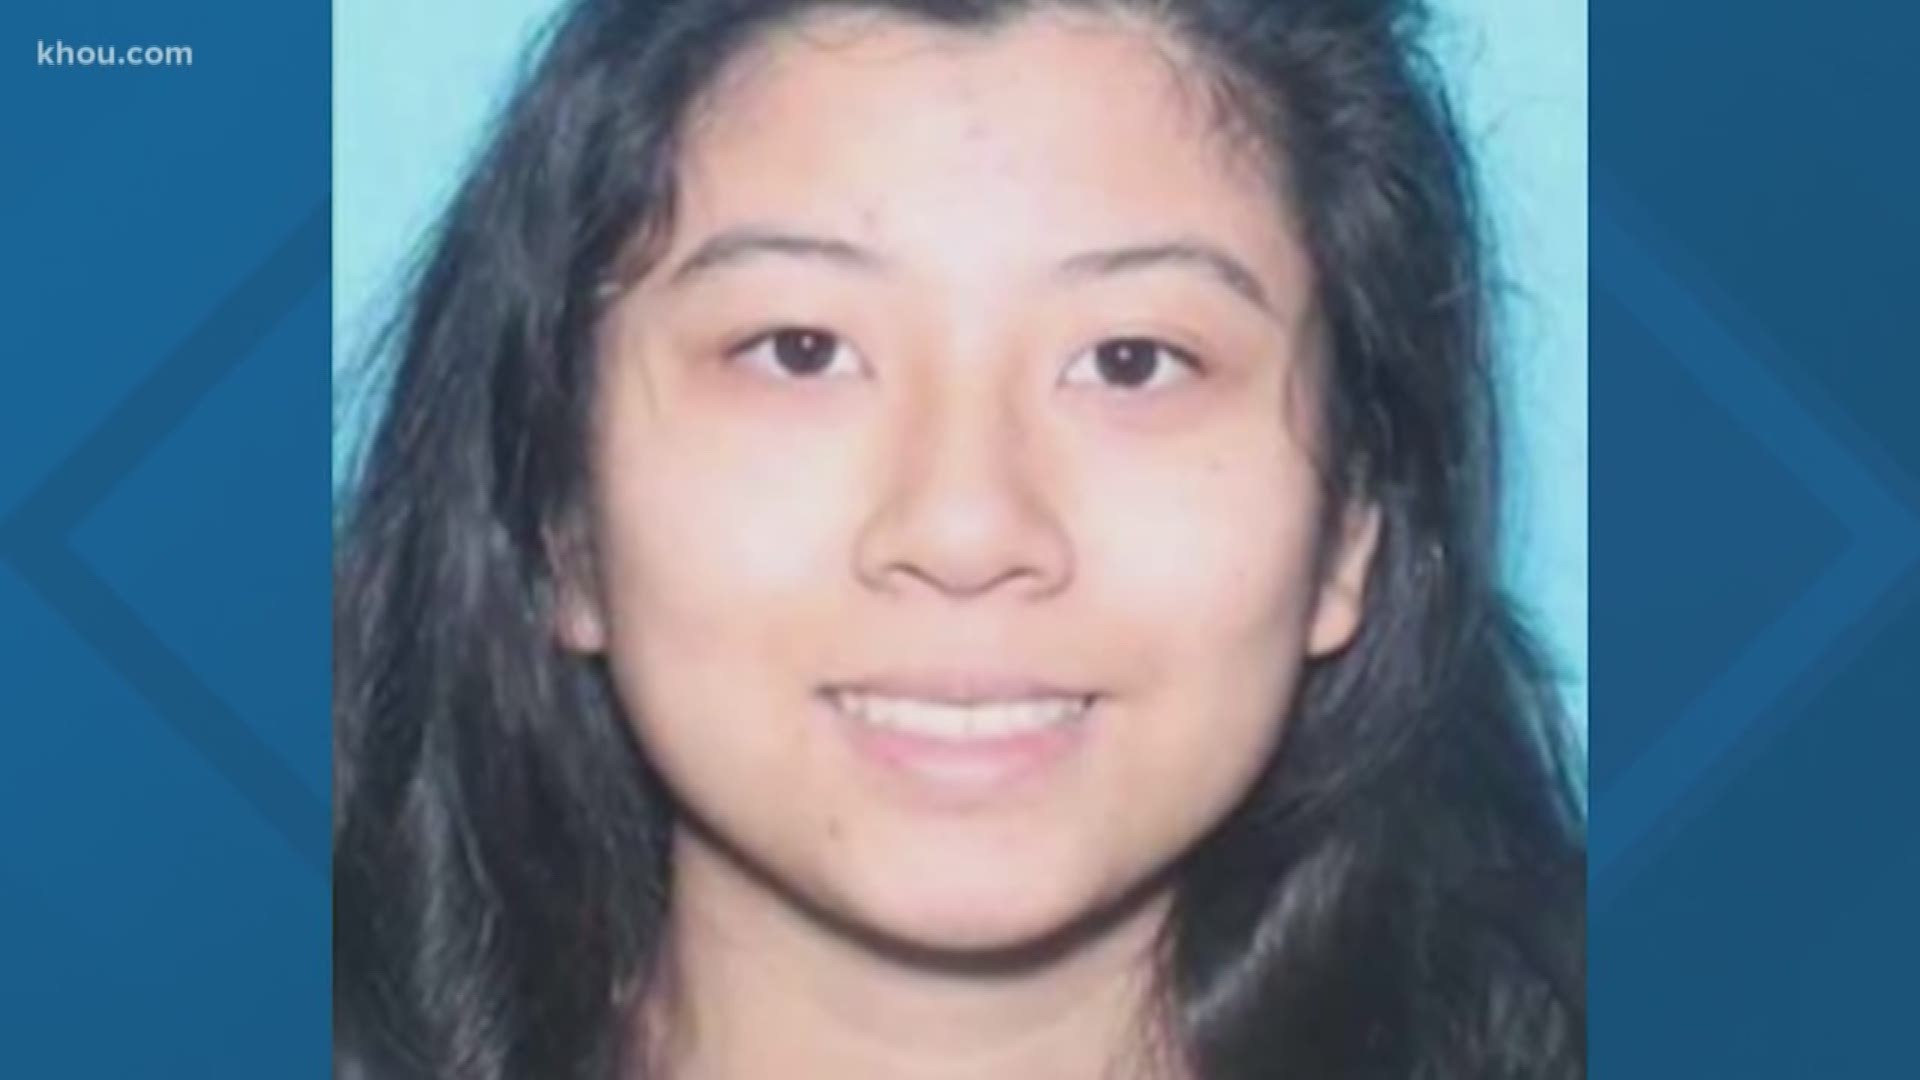 People who know Angela Nguyen say it's unusual for her to be gone this long without contacting anyone.